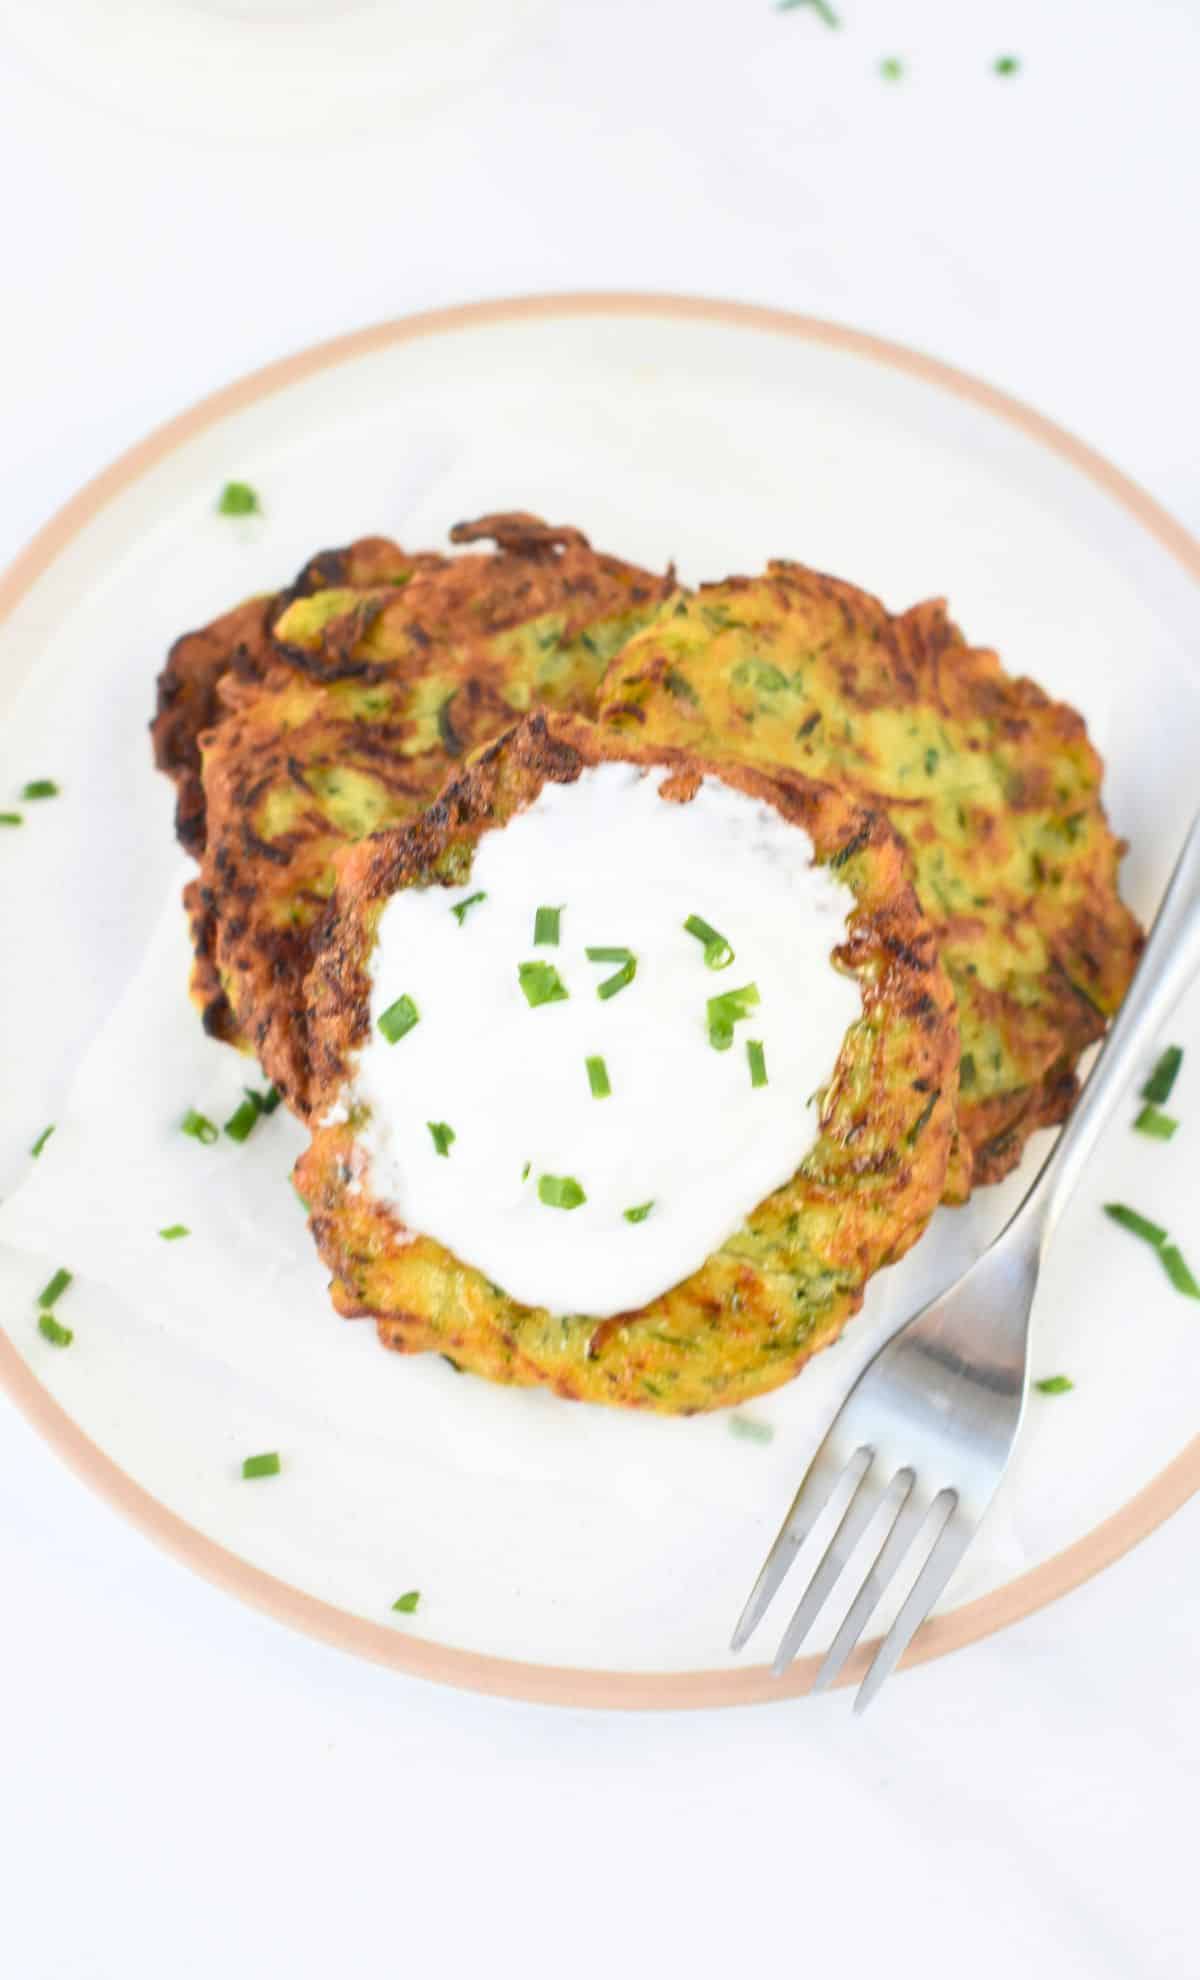 Vegan Zucchini Fritters on a plate, served with vegan sour cream and chives.